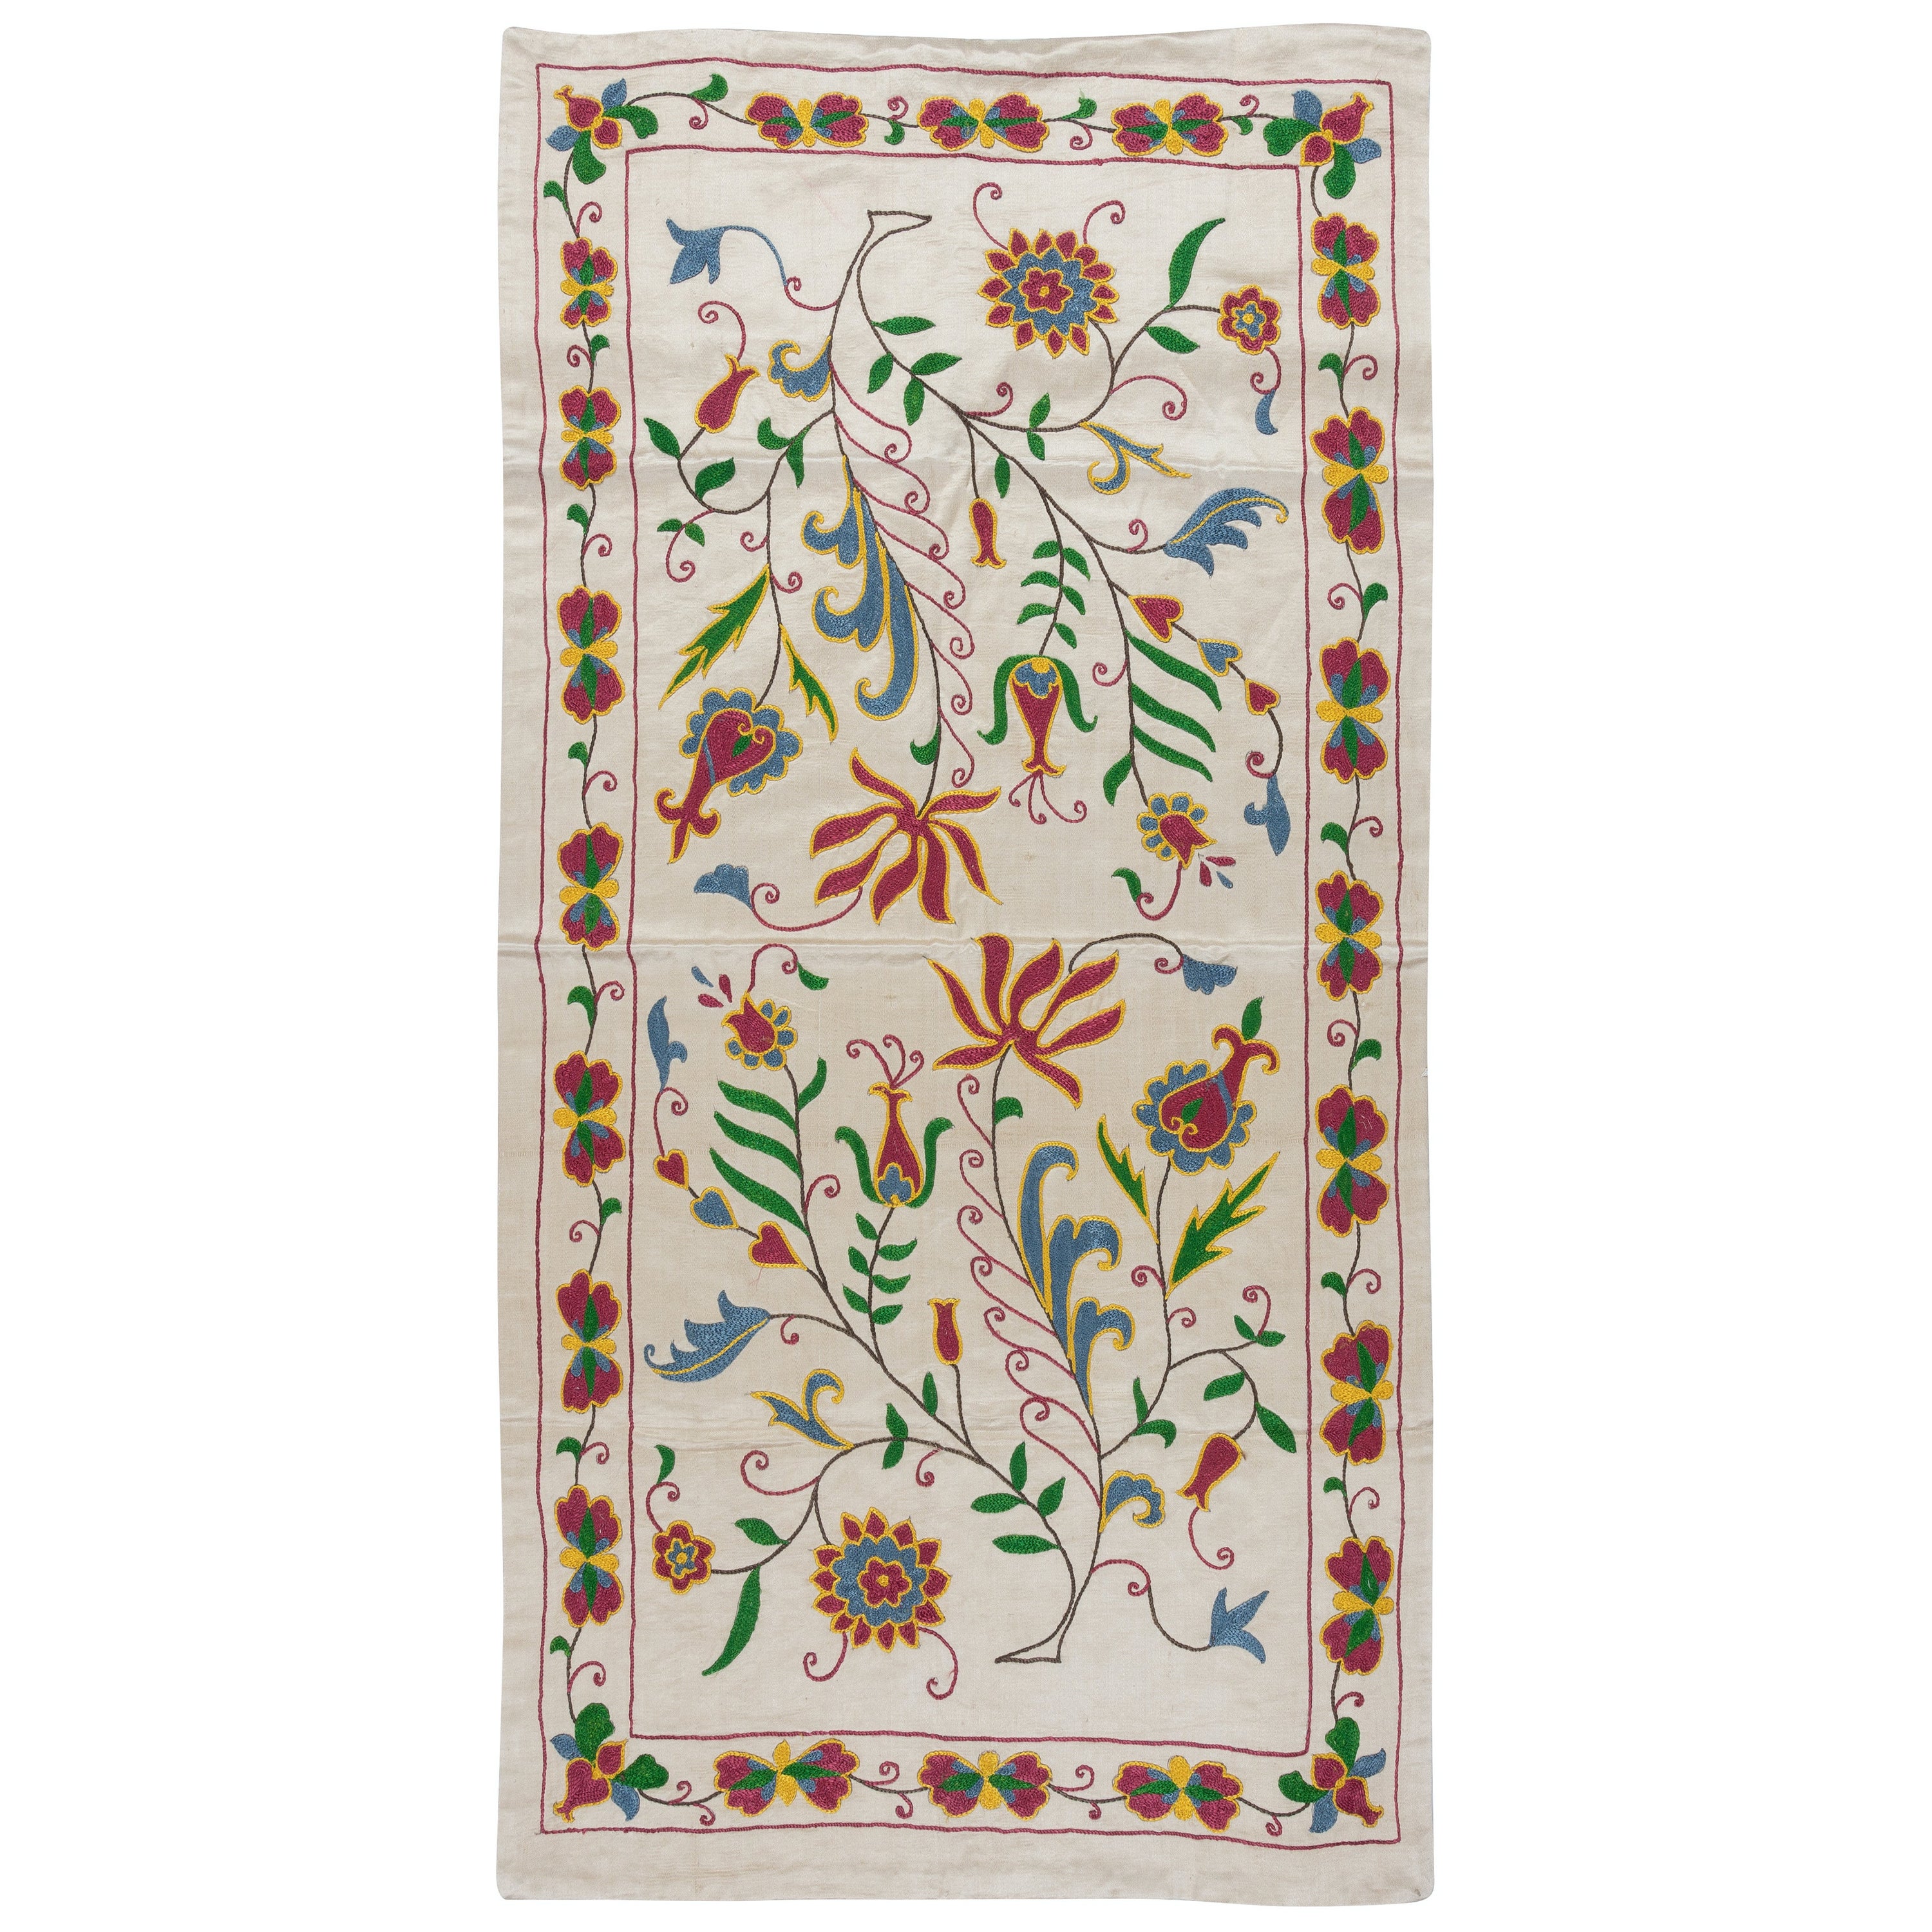 20"x40" Modern 100% Silk Embroidered Suzani Wall Hanging, New Uzbek Table Cover For Sale